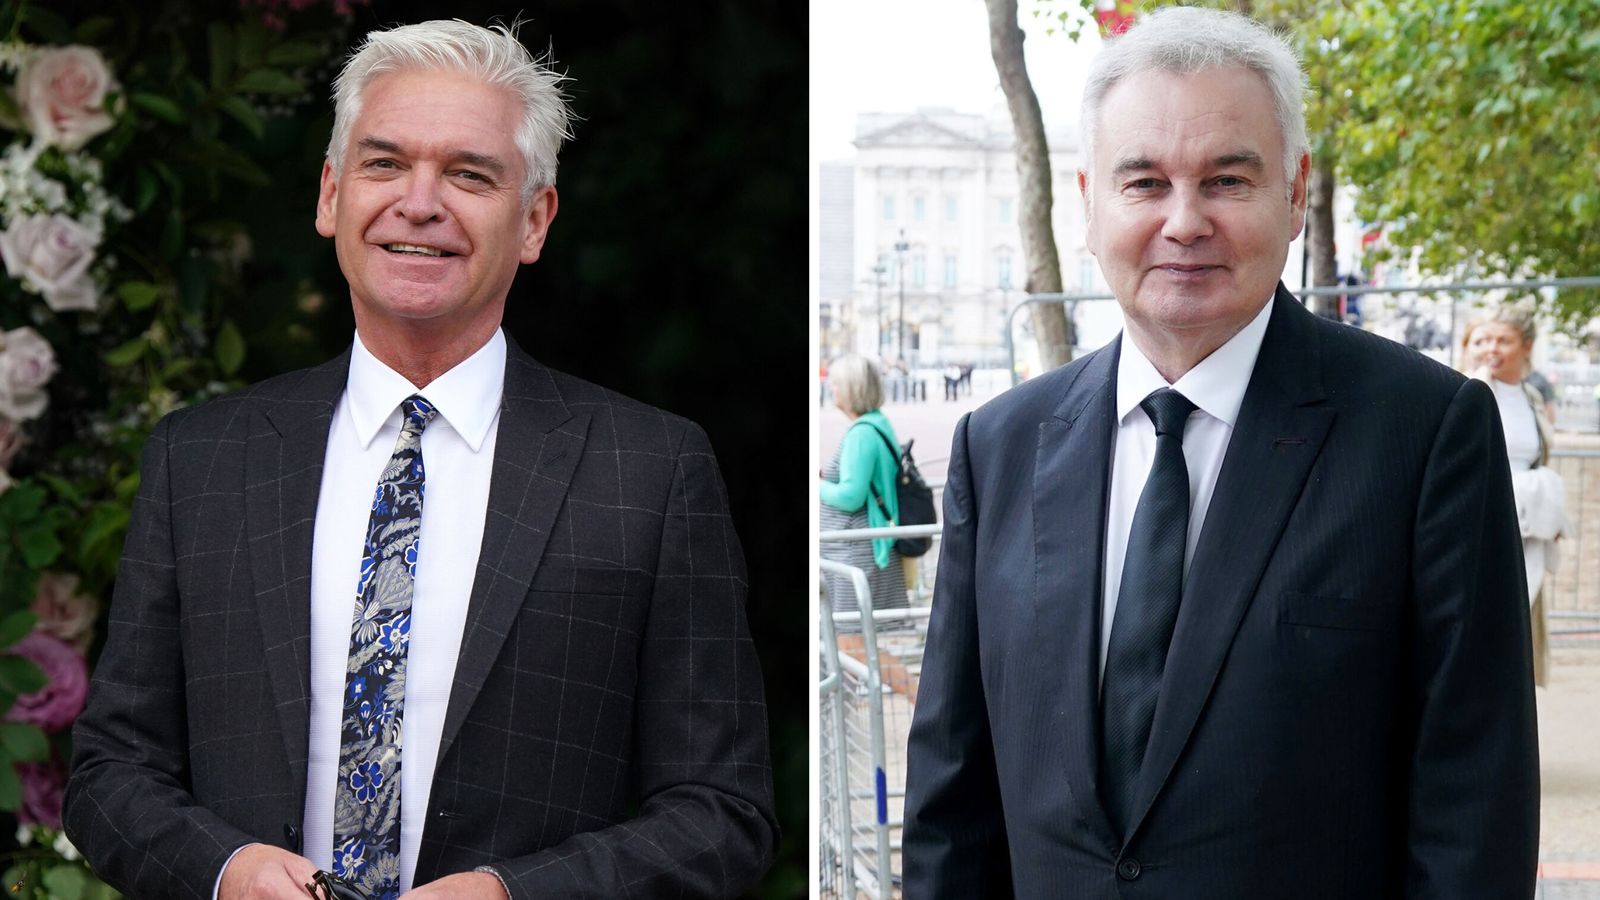 Eamonn Holmes claims there was 'total cover-up' over Phillip Schofield's affair with younger man